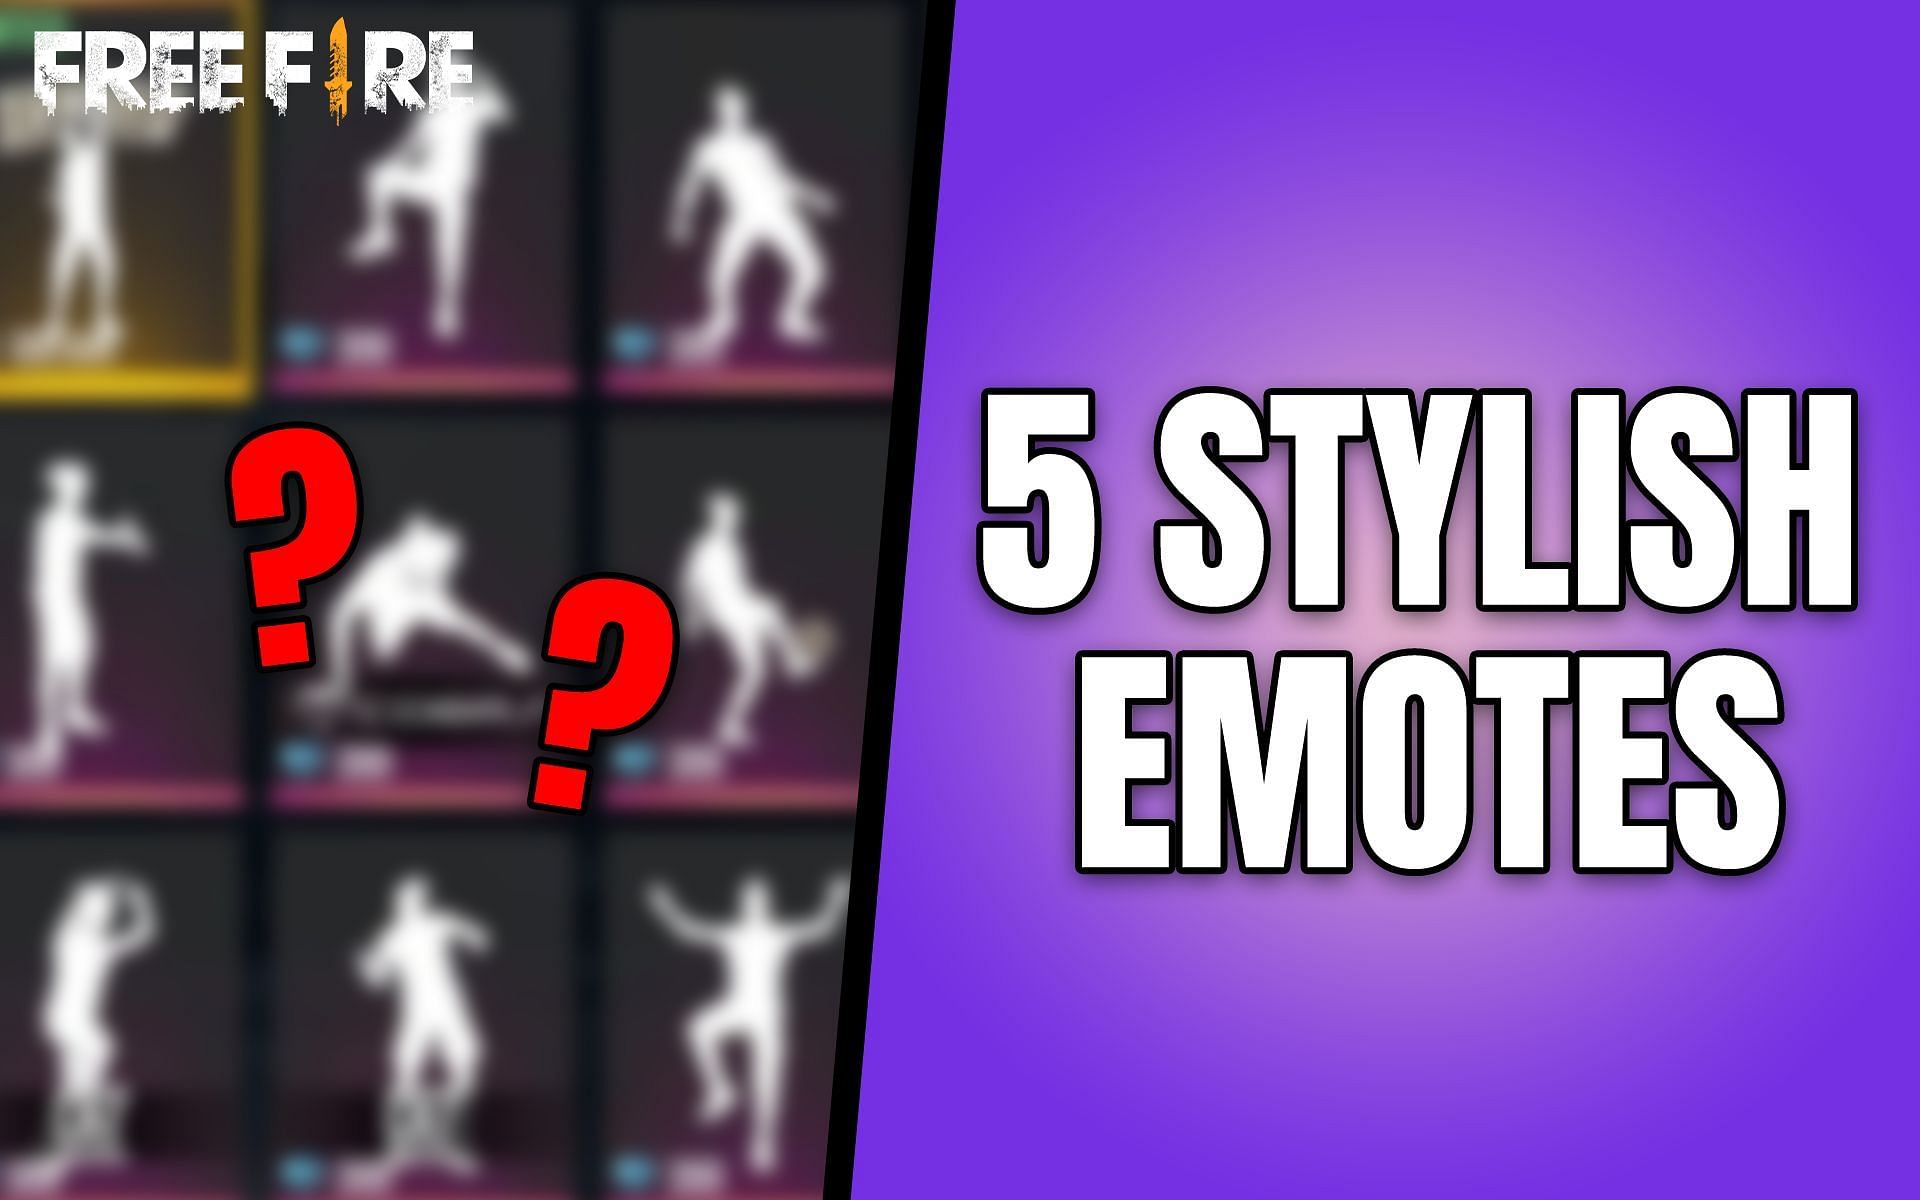 Top 5 stylish Free Fire emotes for gamers in November 2021